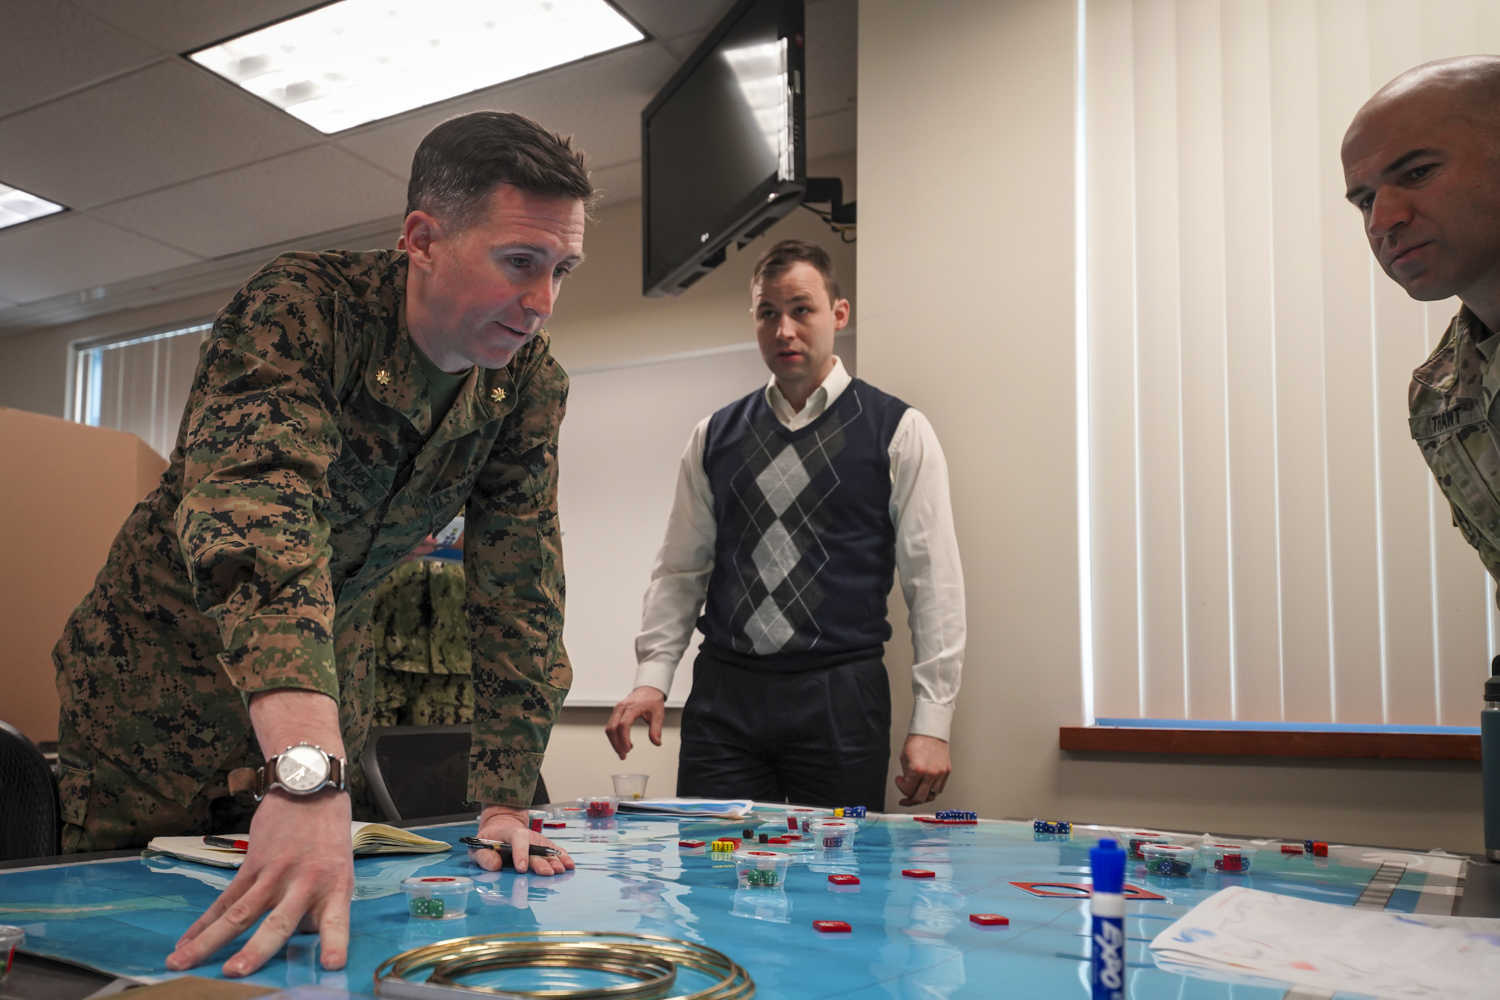 The U.S. Naval War College (NWC) Wargaming Department hosted the 11th iteration of its “Wargaming 101” introductory course, onboard Naval Station Newport, January 16-25.